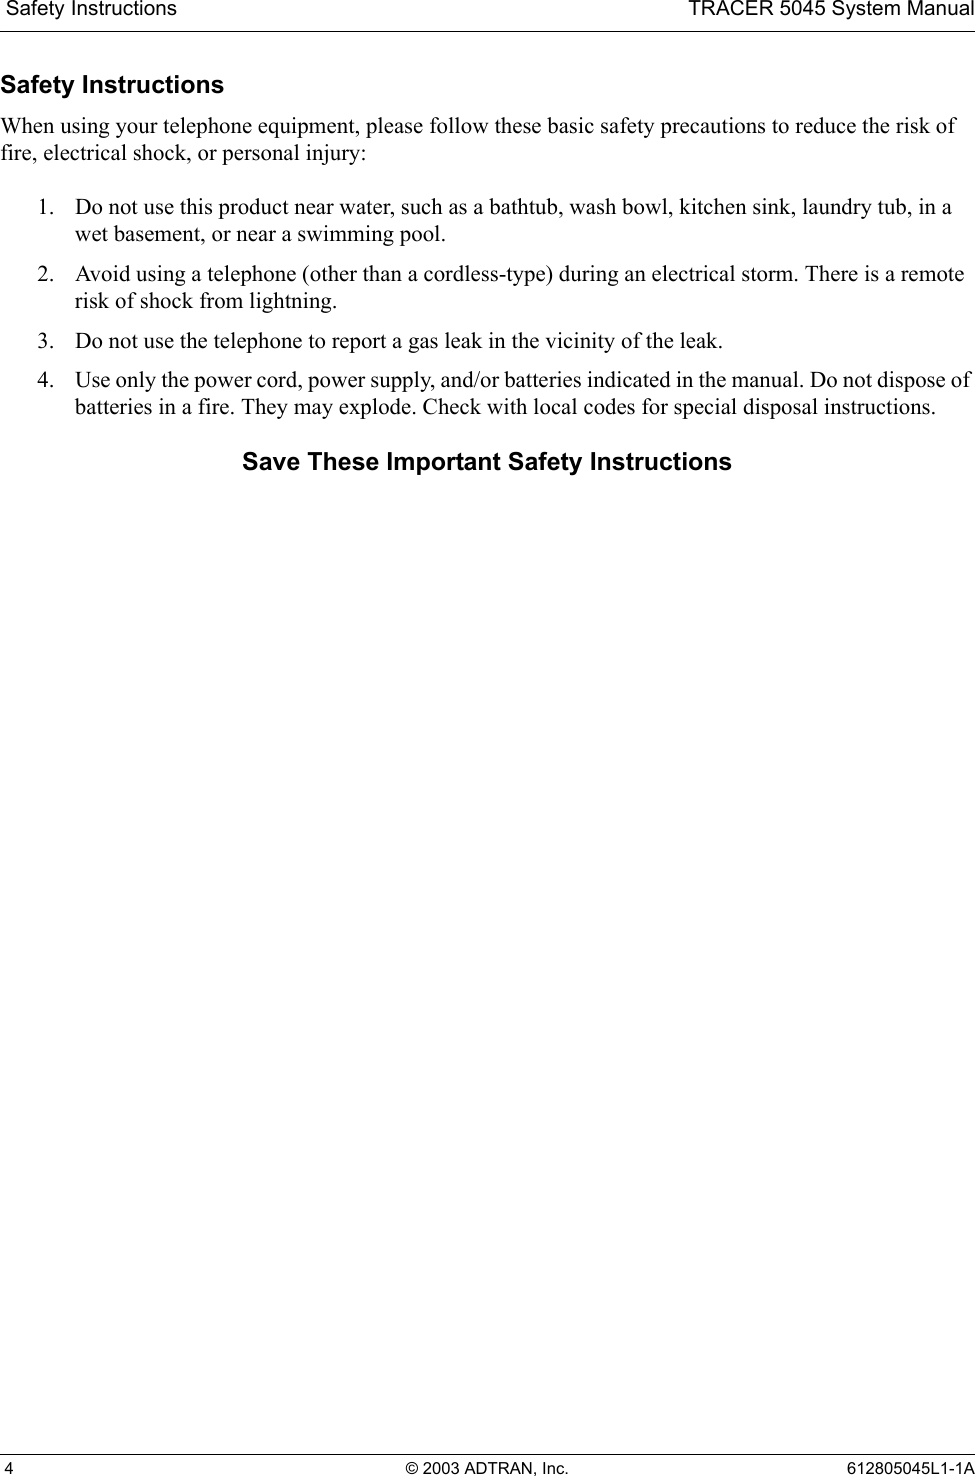  Safety Instructions TRACER 5045 System Manual 4 © 2003 ADTRAN, Inc. 612805045L1-1ASafety InstructionsWhen using your telephone equipment, please follow these basic safety precautions to reduce the risk of fire, electrical shock, or personal injury:1. Do not use this product near water, such as a bathtub, wash bowl, kitchen sink, laundry tub, in a wet basement, or near a swimming pool.2. Avoid using a telephone (other than a cordless-type) during an electrical storm. There is a remote risk of shock from lightning.3. Do not use the telephone to report a gas leak in the vicinity of the leak.4. Use only the power cord, power supply, and/or batteries indicated in the manual. Do not dispose of batteries in a fire. They may explode. Check with local codes for special disposal instructions.Save These Important Safety Instructions